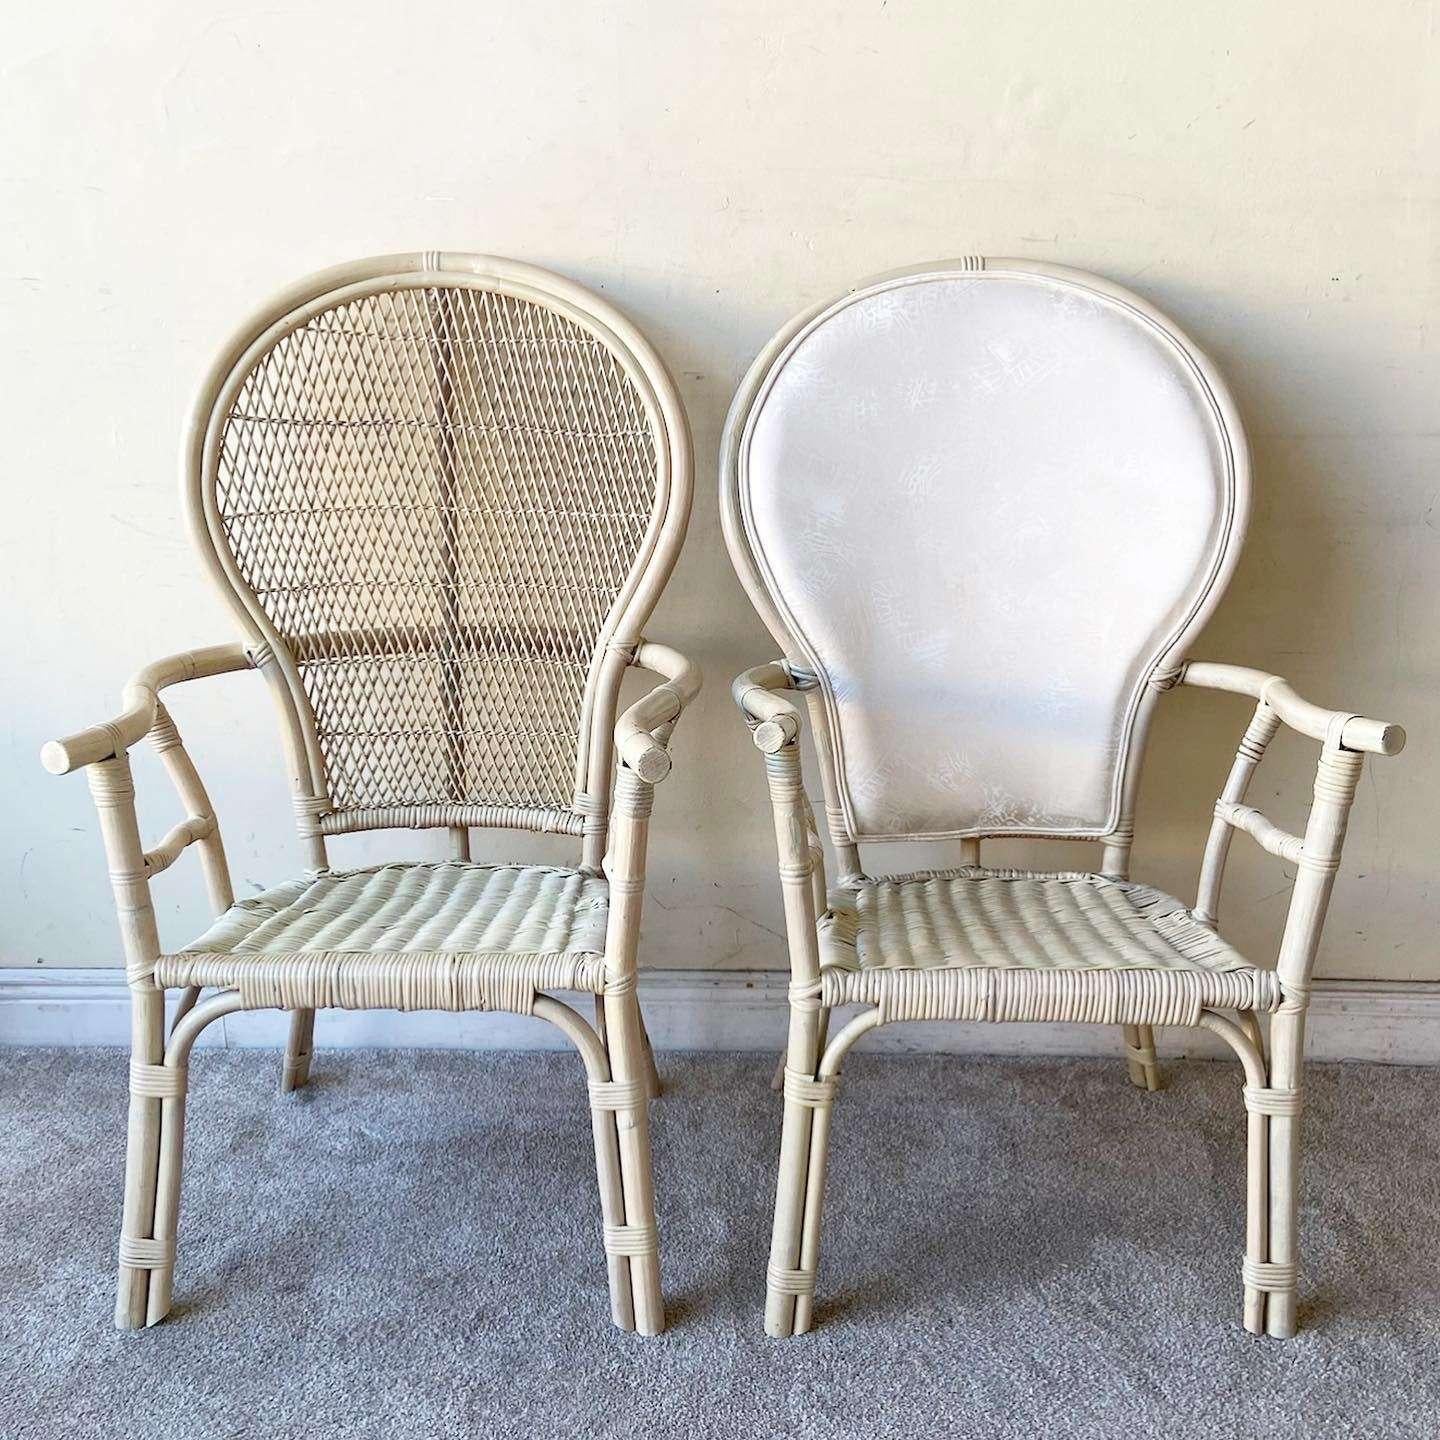 Incredible set of 6 exceptional boho chic dining chairs. Each features a balloon back with a bamboo rattan frame. Two of the chairs have an upholstered back and the other 4 do not.

Seat height is 16.0 in